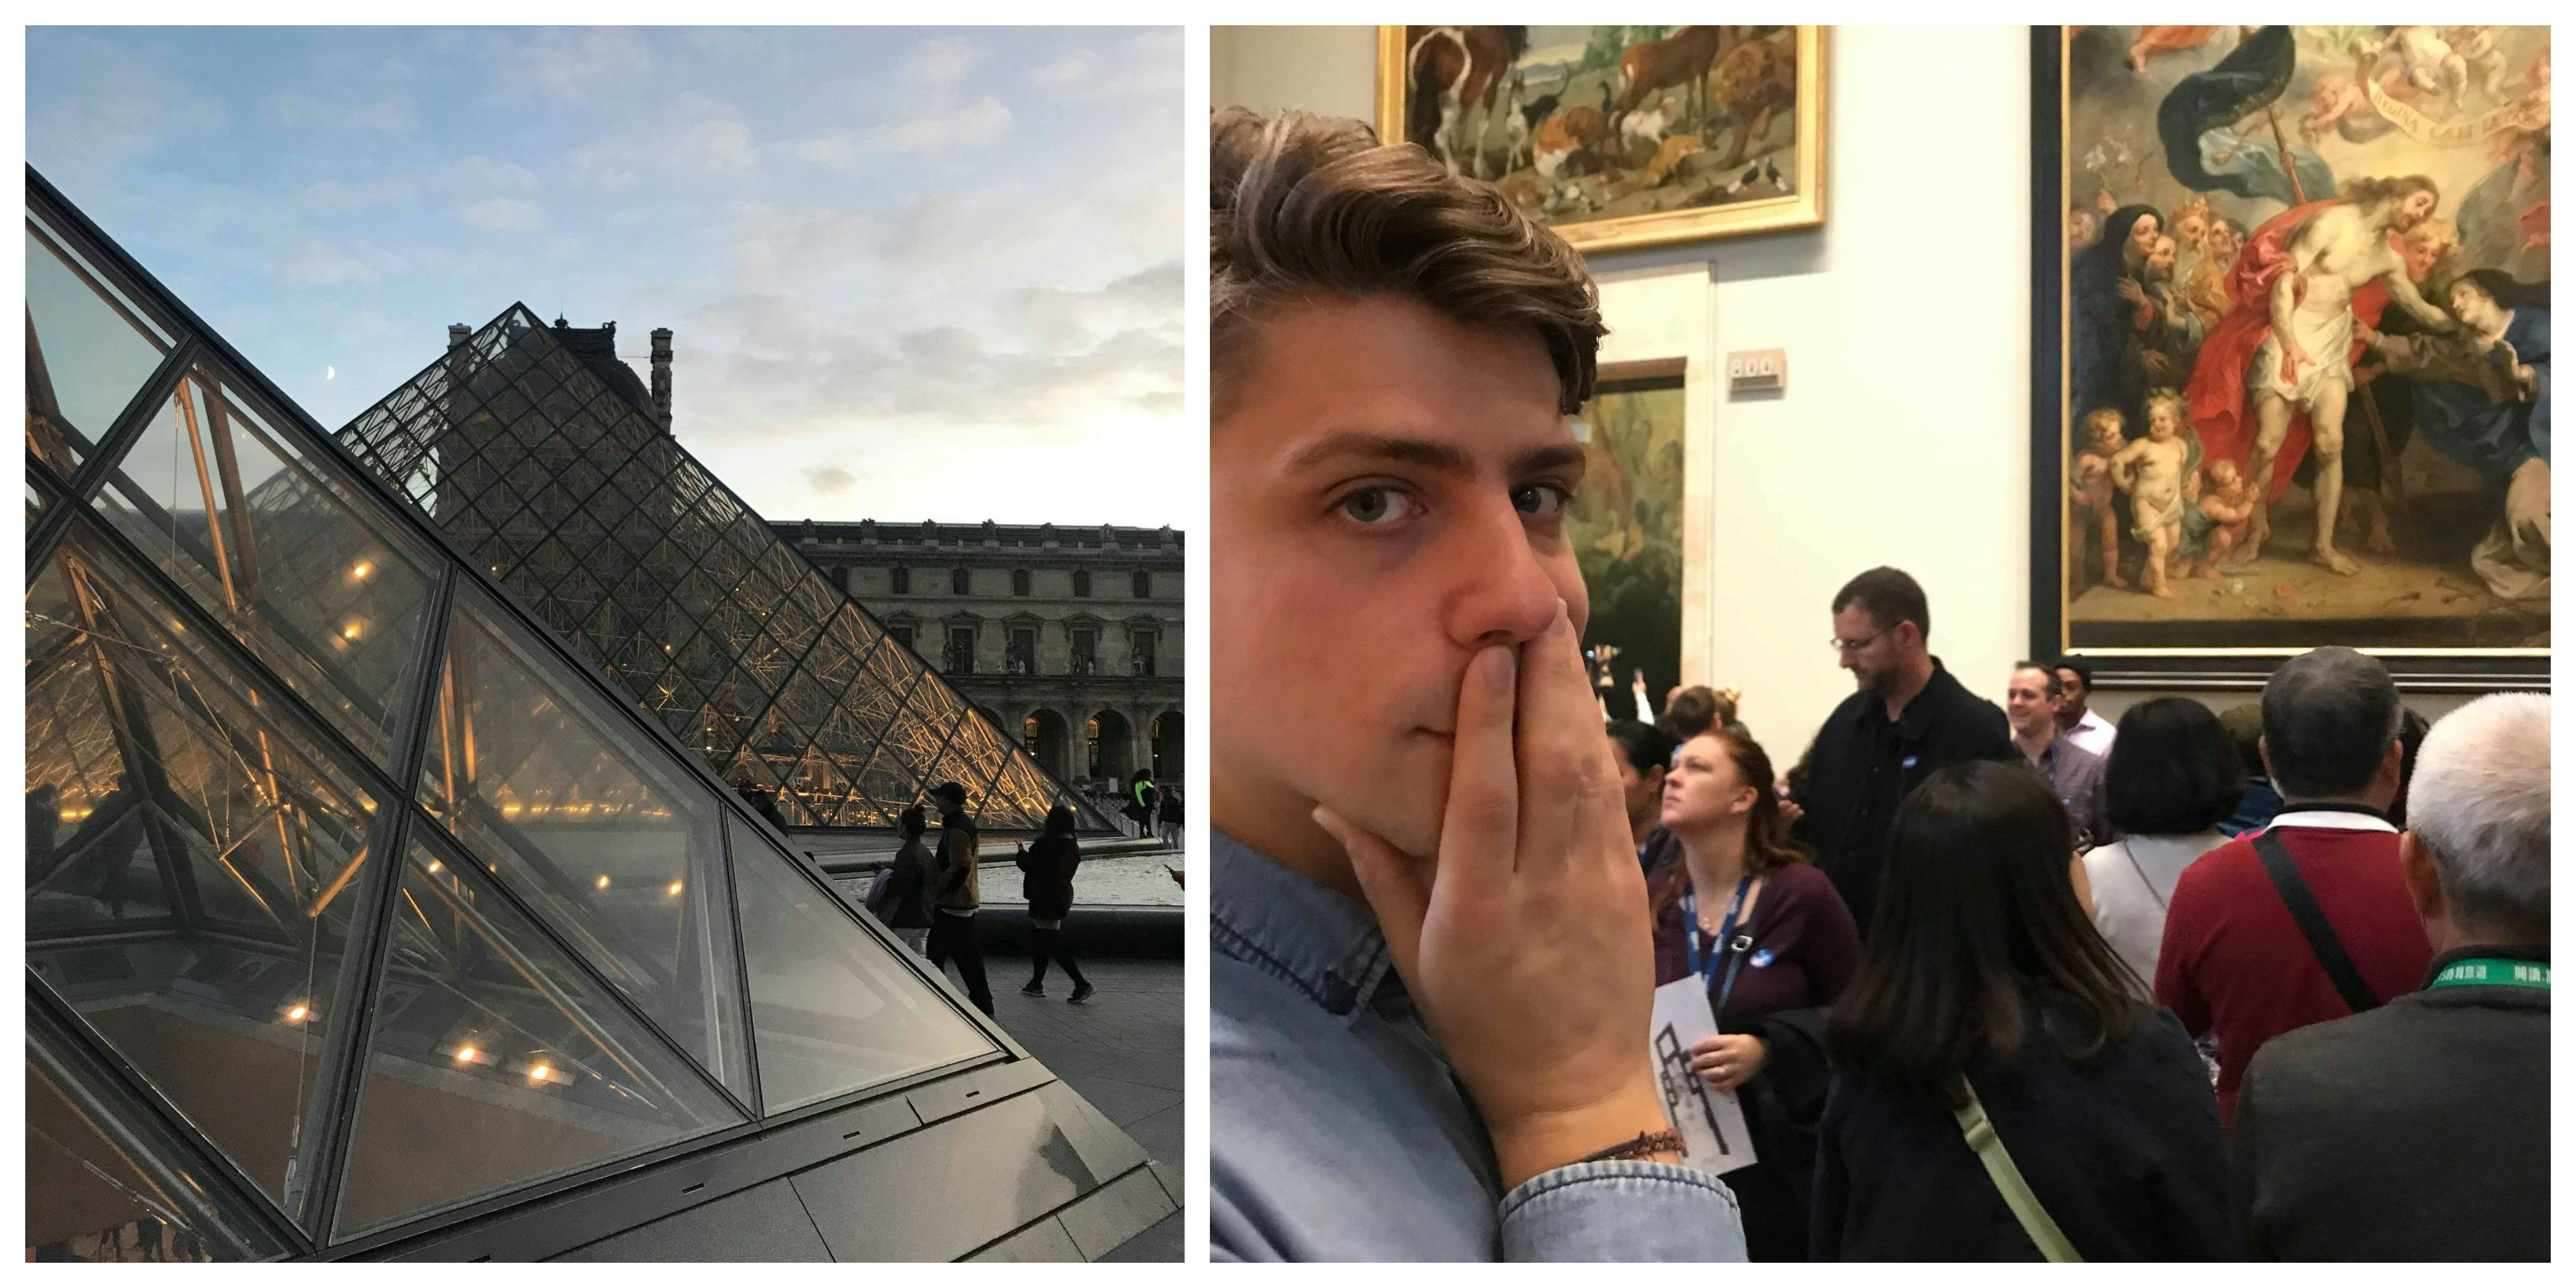 On the left the Louvre pyramid glows with warm lights as the sun goes down. On the right a man looks in shock at the enormous queue for the Mona Lisa